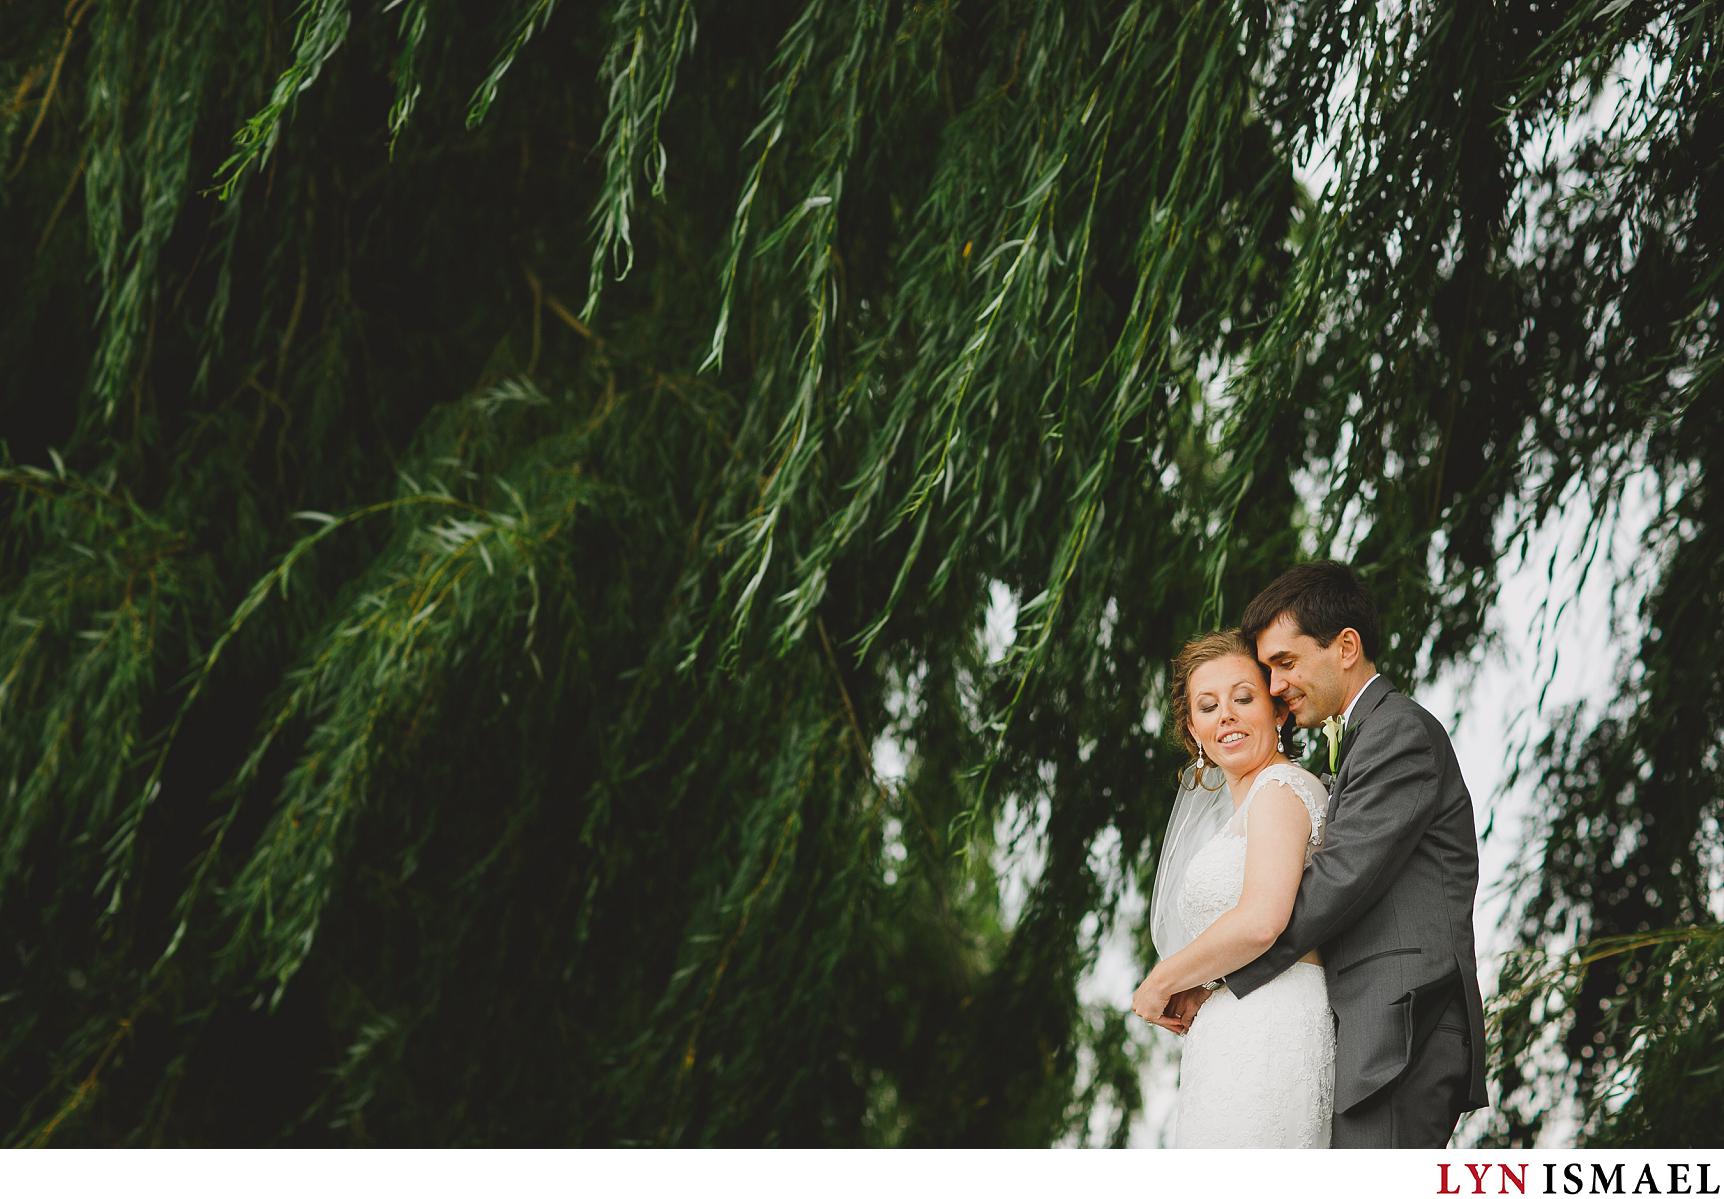 A portrait of the bride and groom under old willow trees at Puddicombe Farms in Winona, Ontario